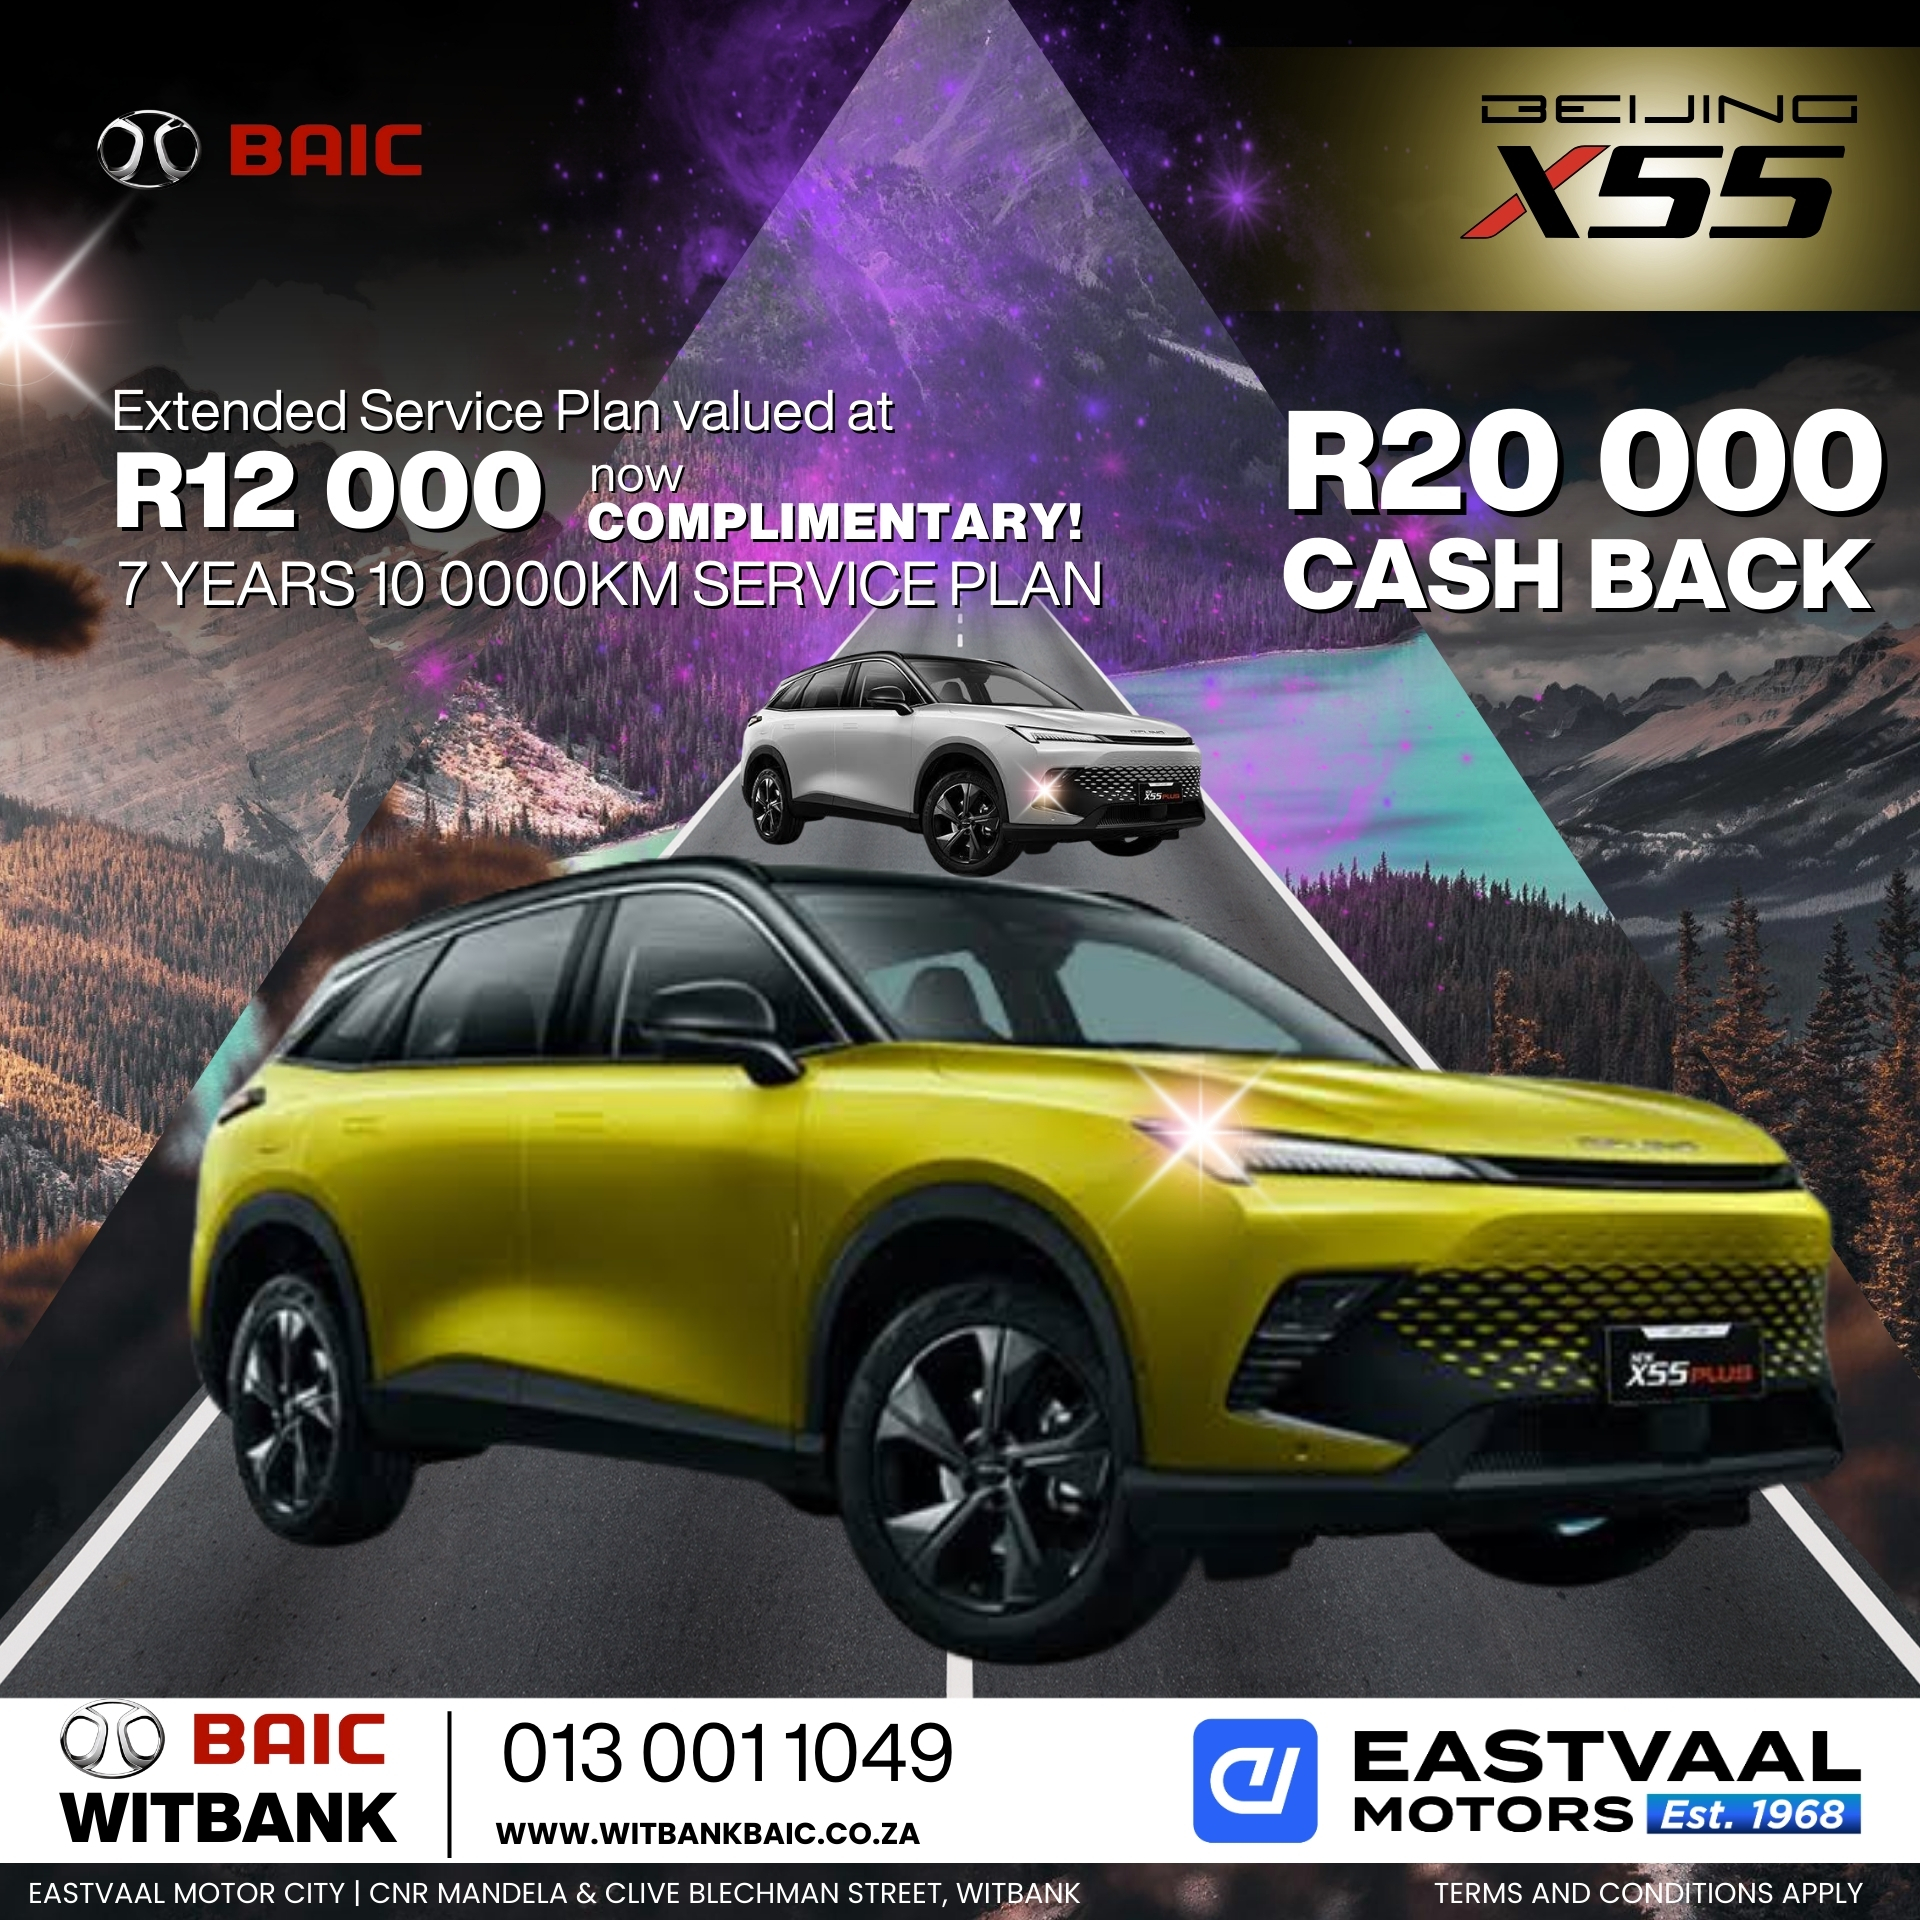 Discover the BAIC advantage this July at Eastvaal Motor City. Quality, performance, and great deals await! image from 